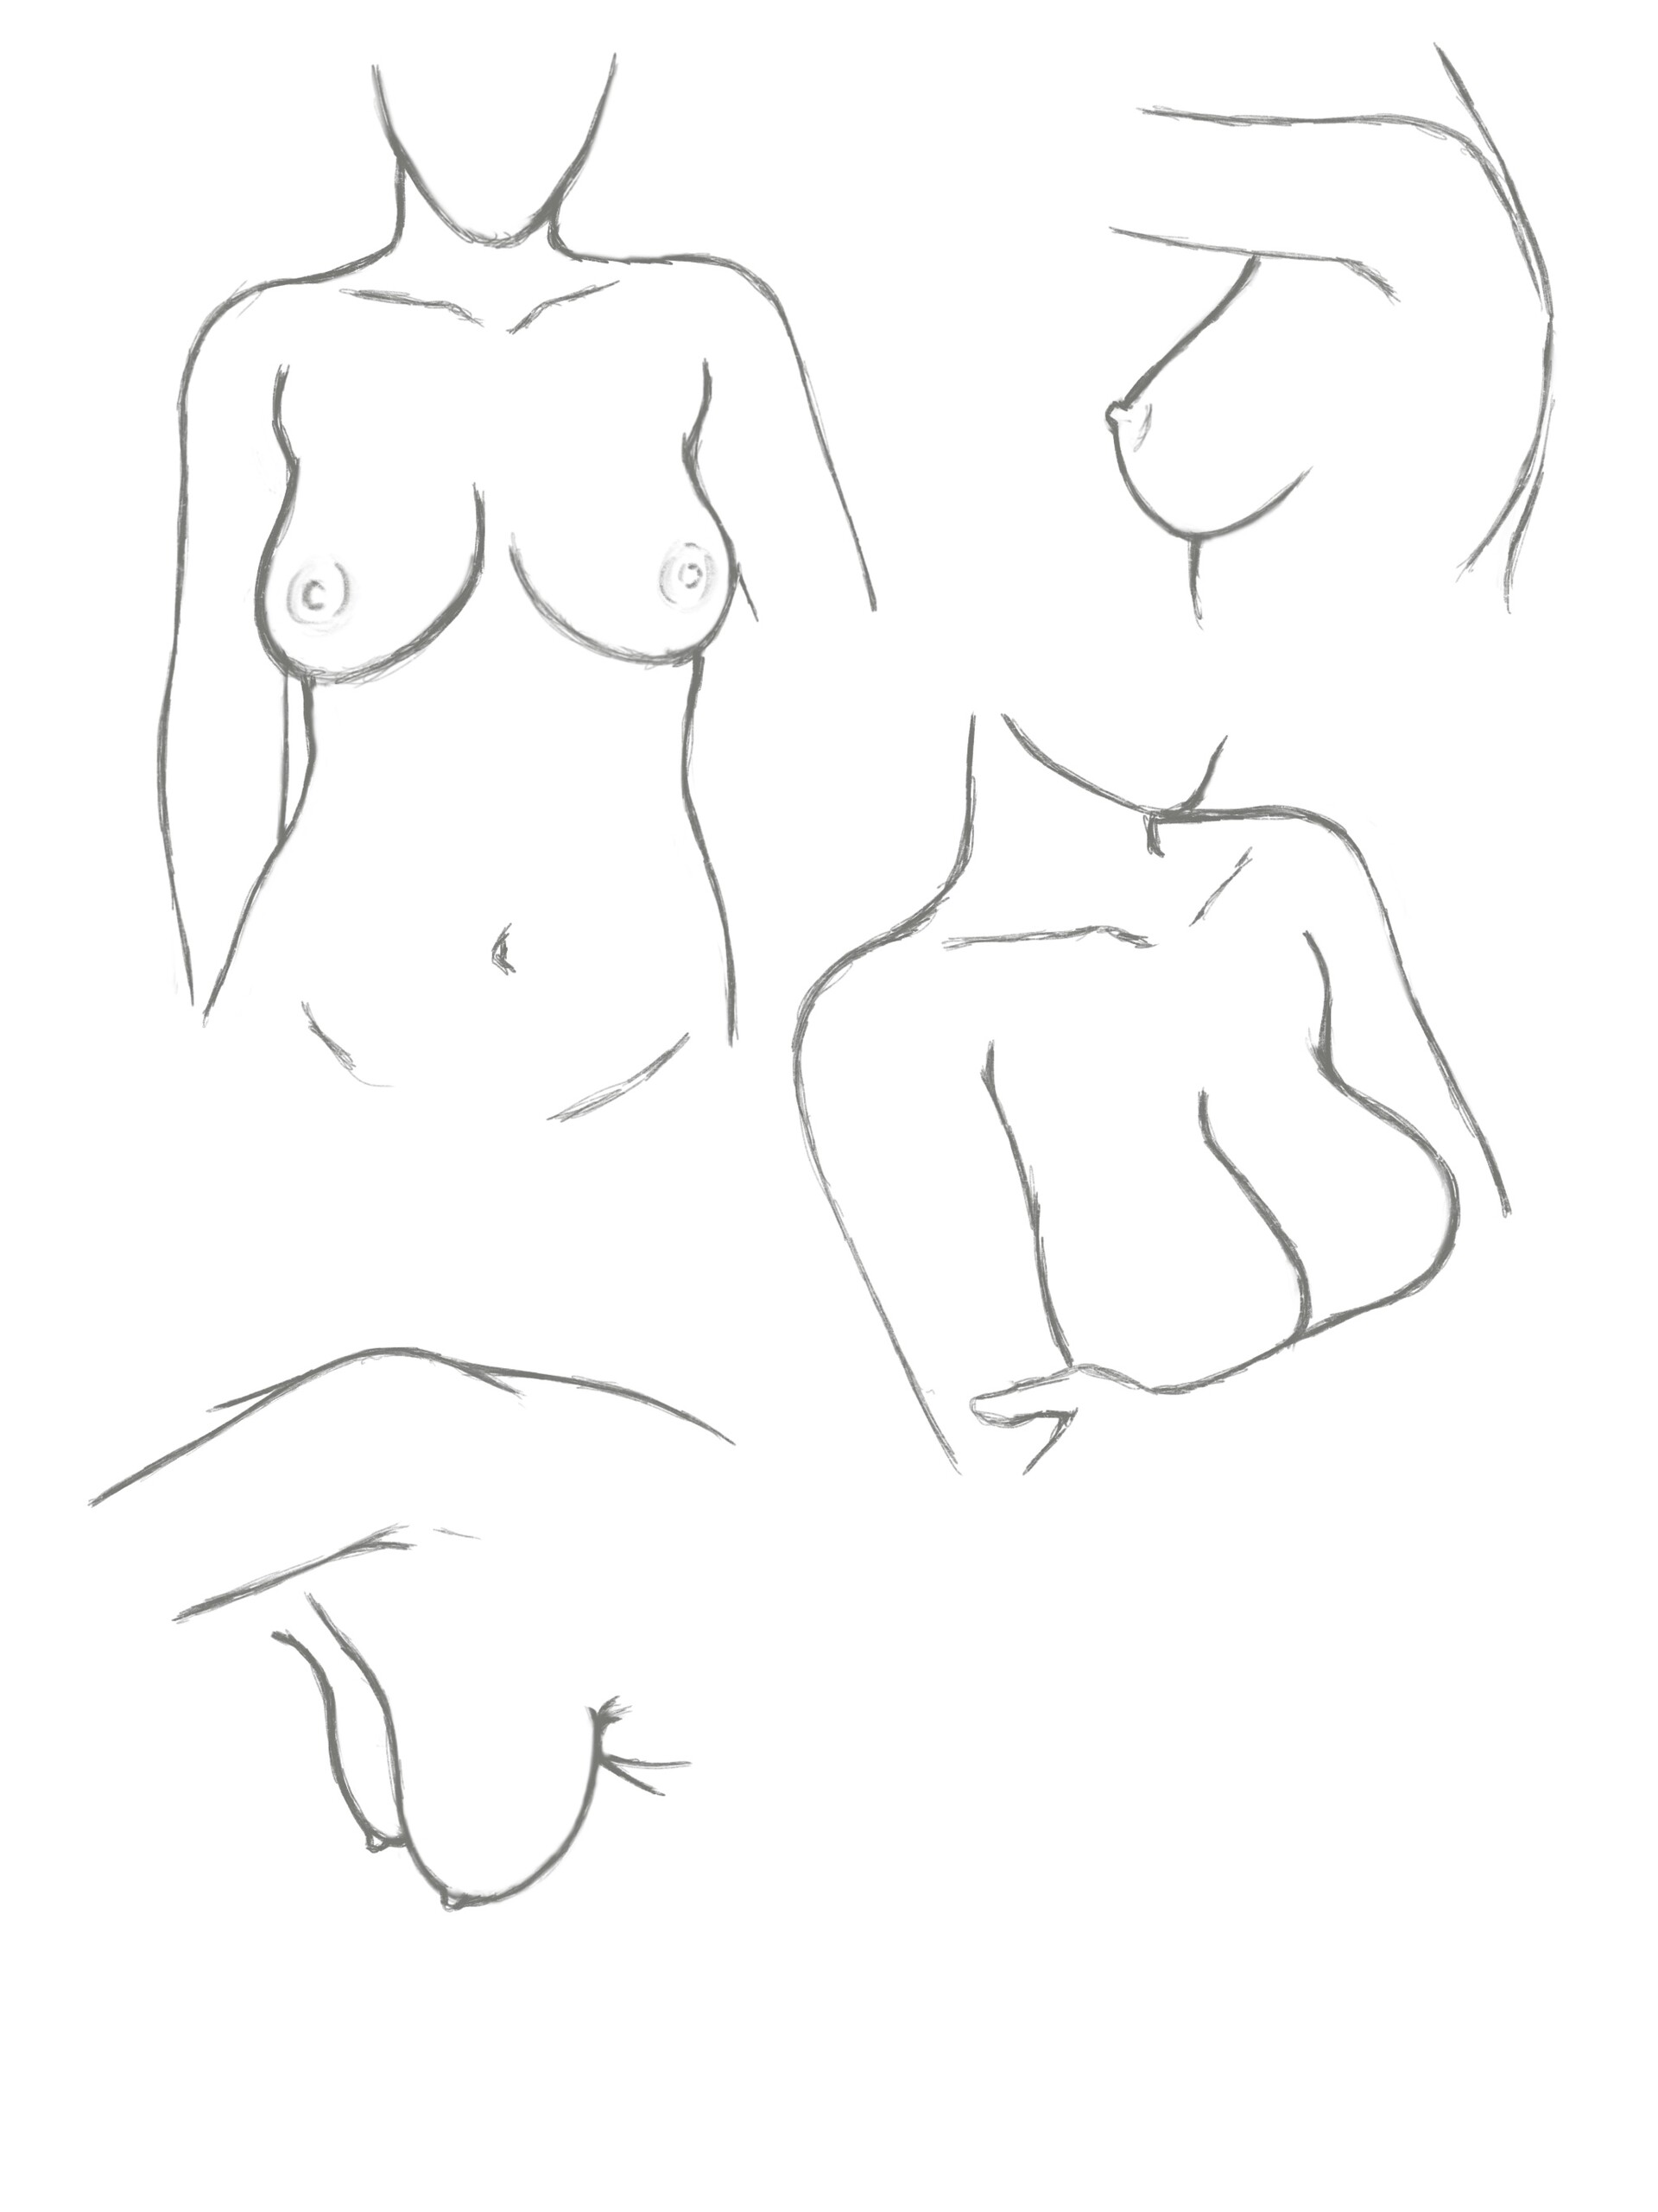 How to draw breast~ by Lovecusty on DeviantArt